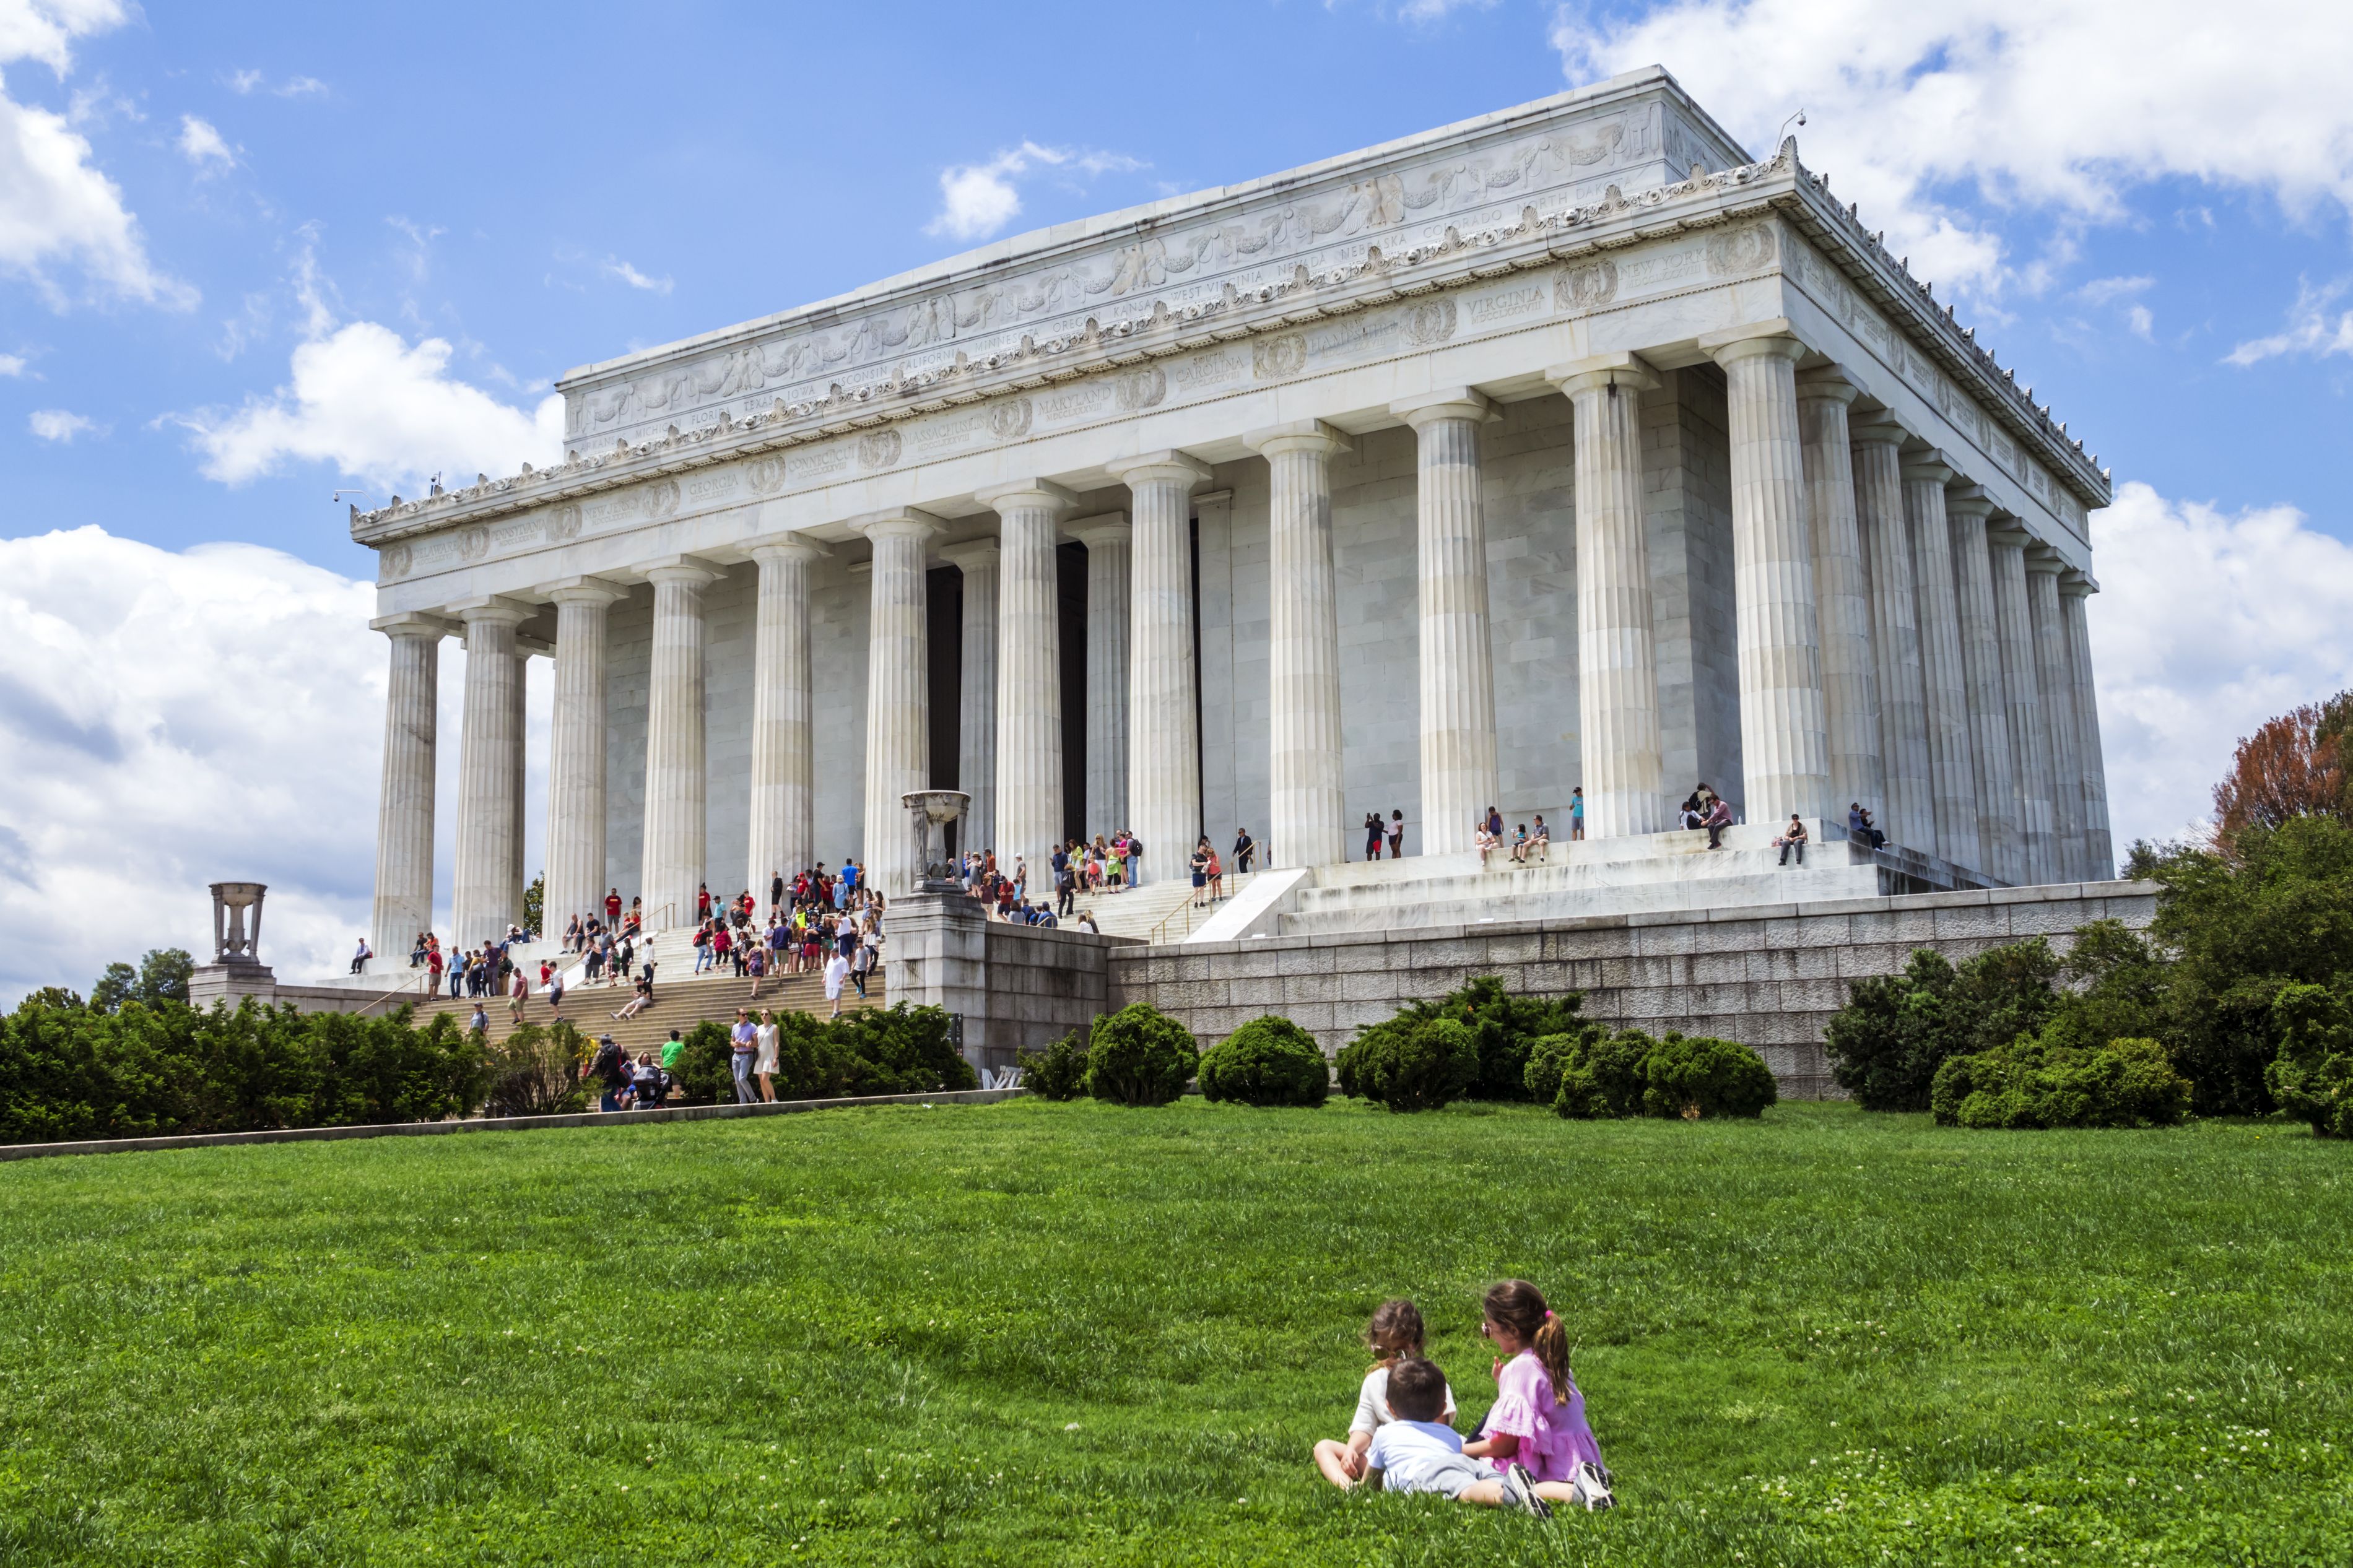 Children sit in front of the Lincoln Memorial